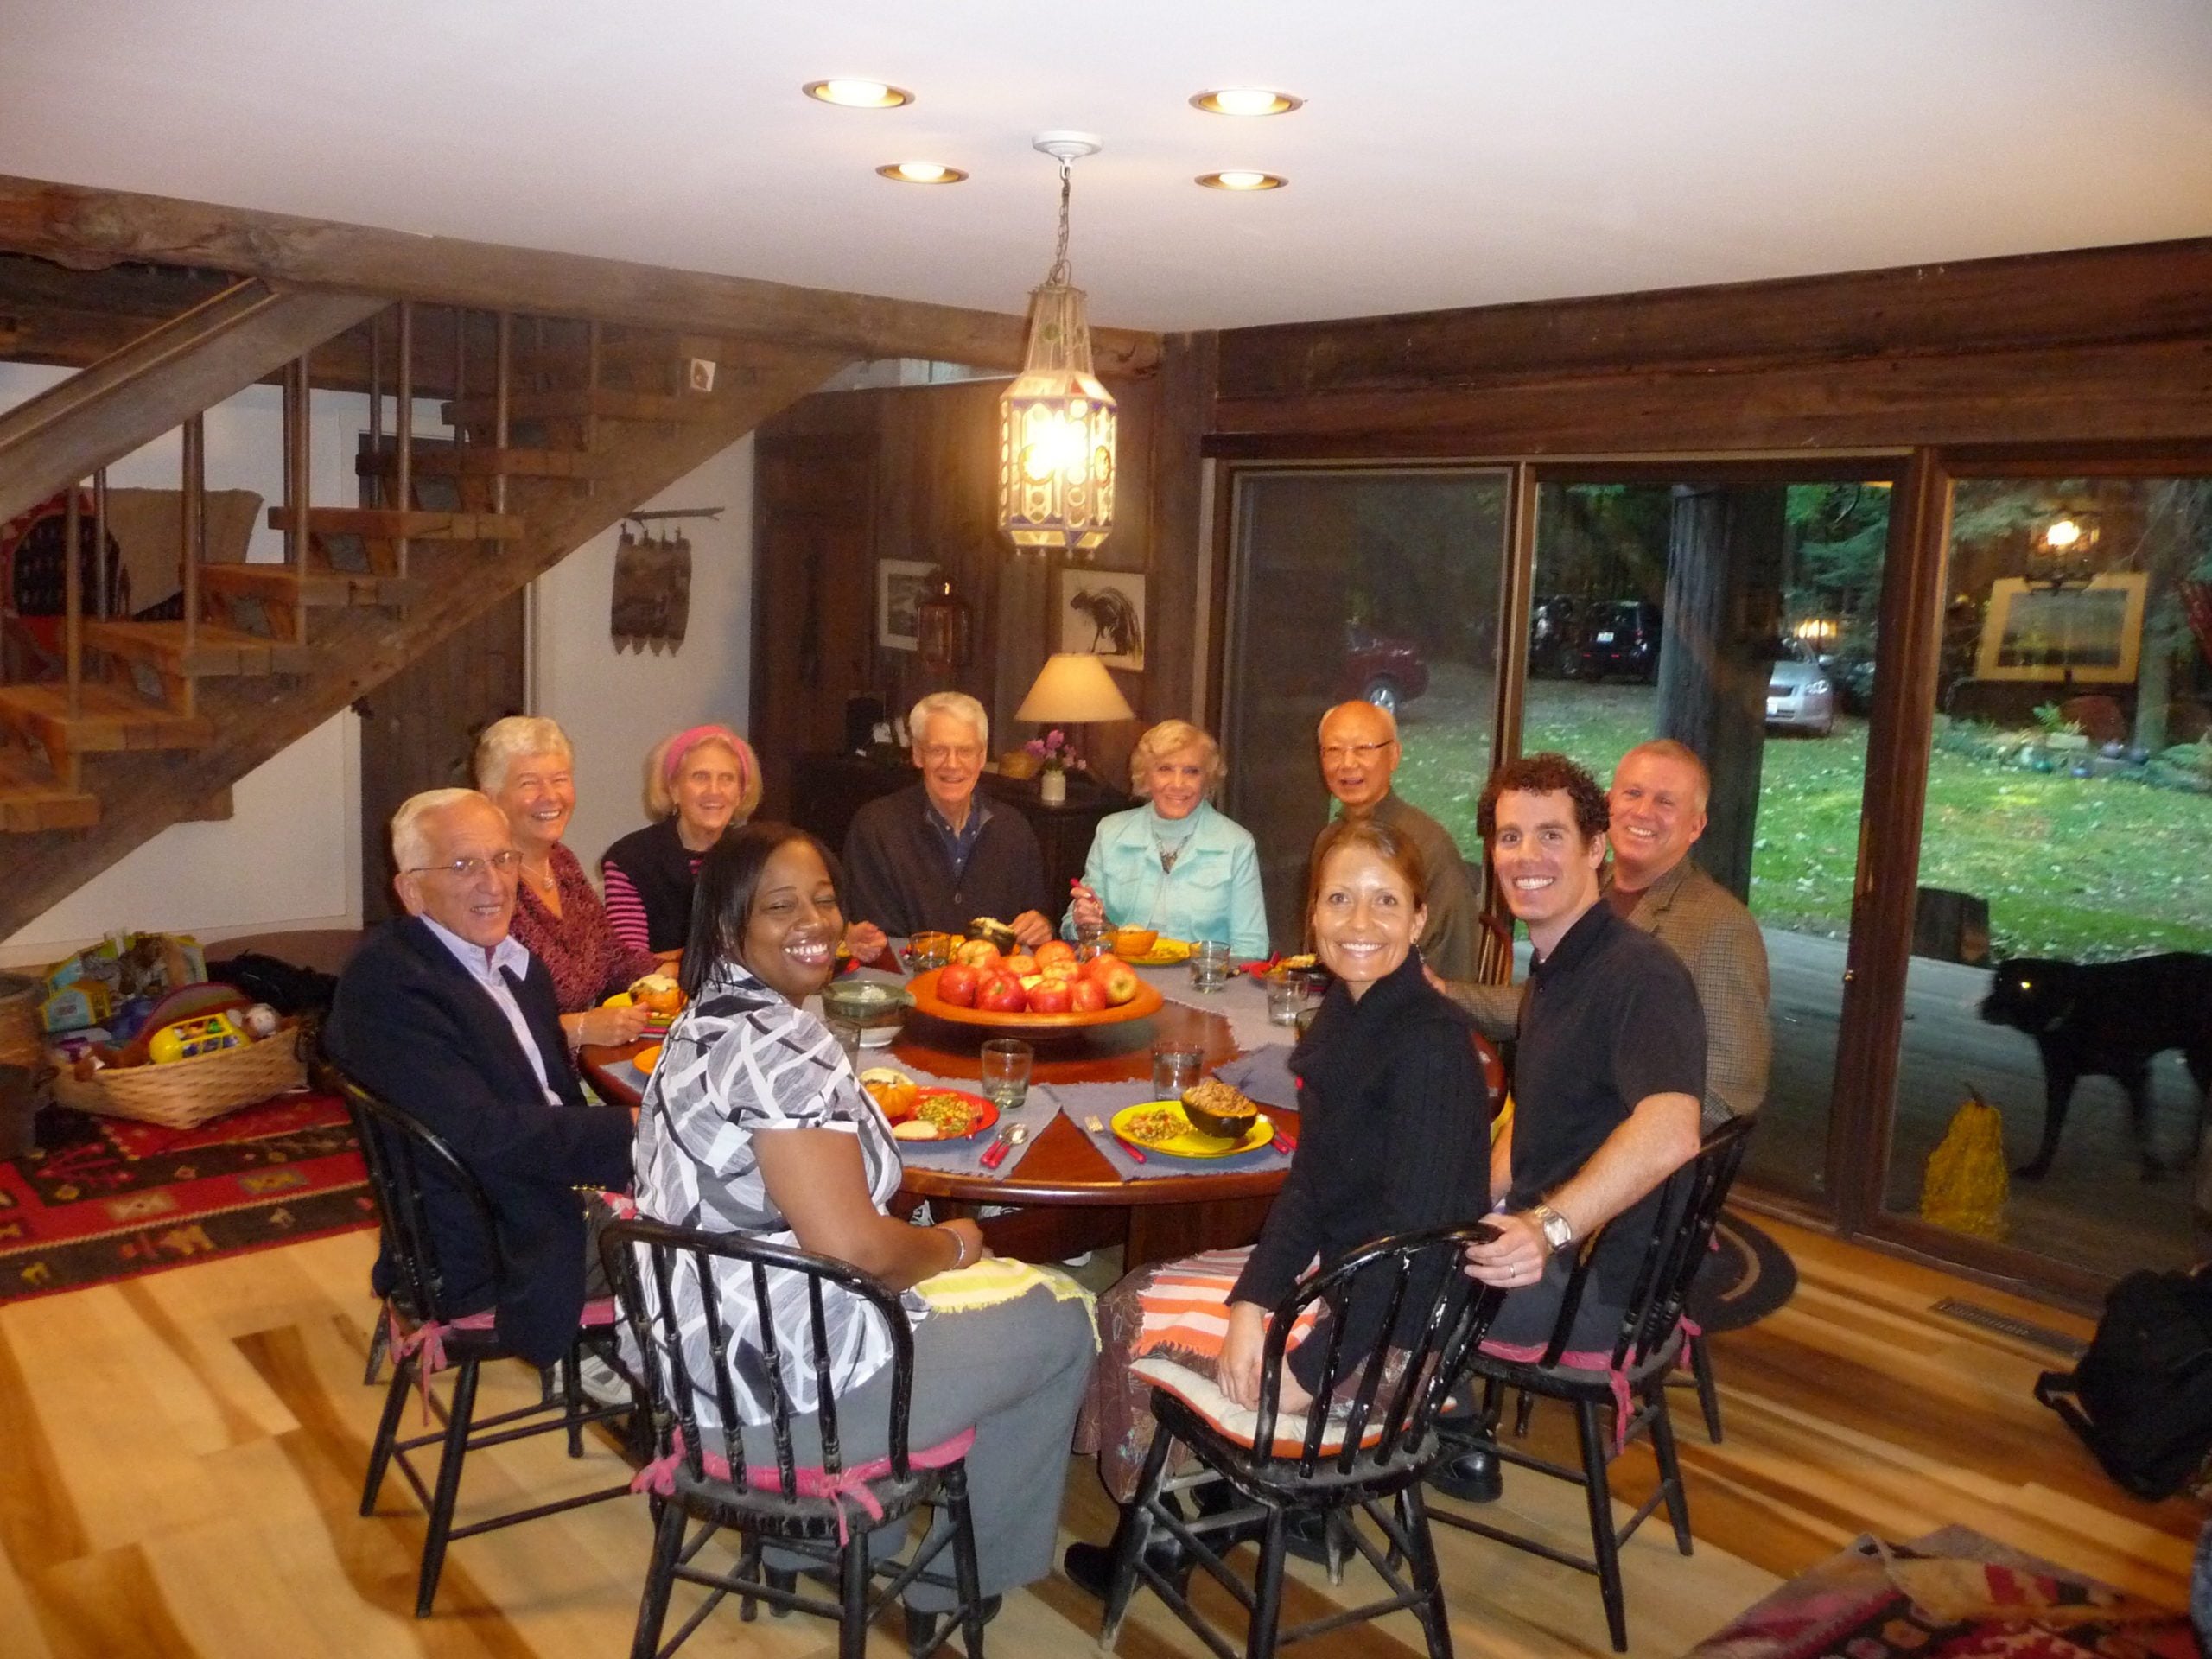 The cast and crew of the Forks Over Knives documentary enjoy a plant-based meal around a circular table, 2009